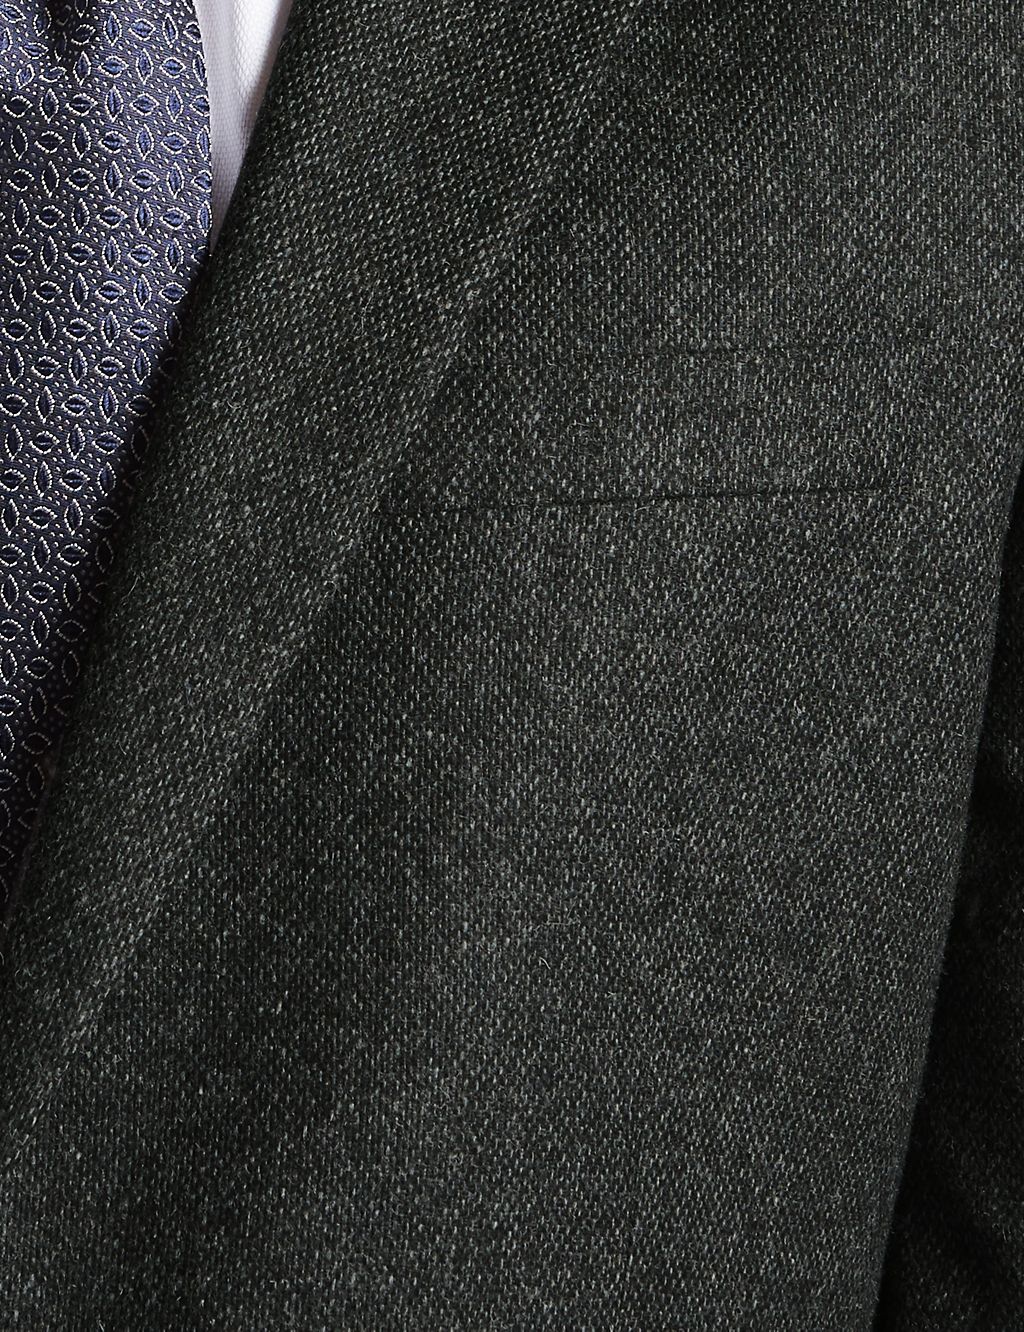 Charcoal Wool Blend Jacket with Italian Fabric 8 of 9